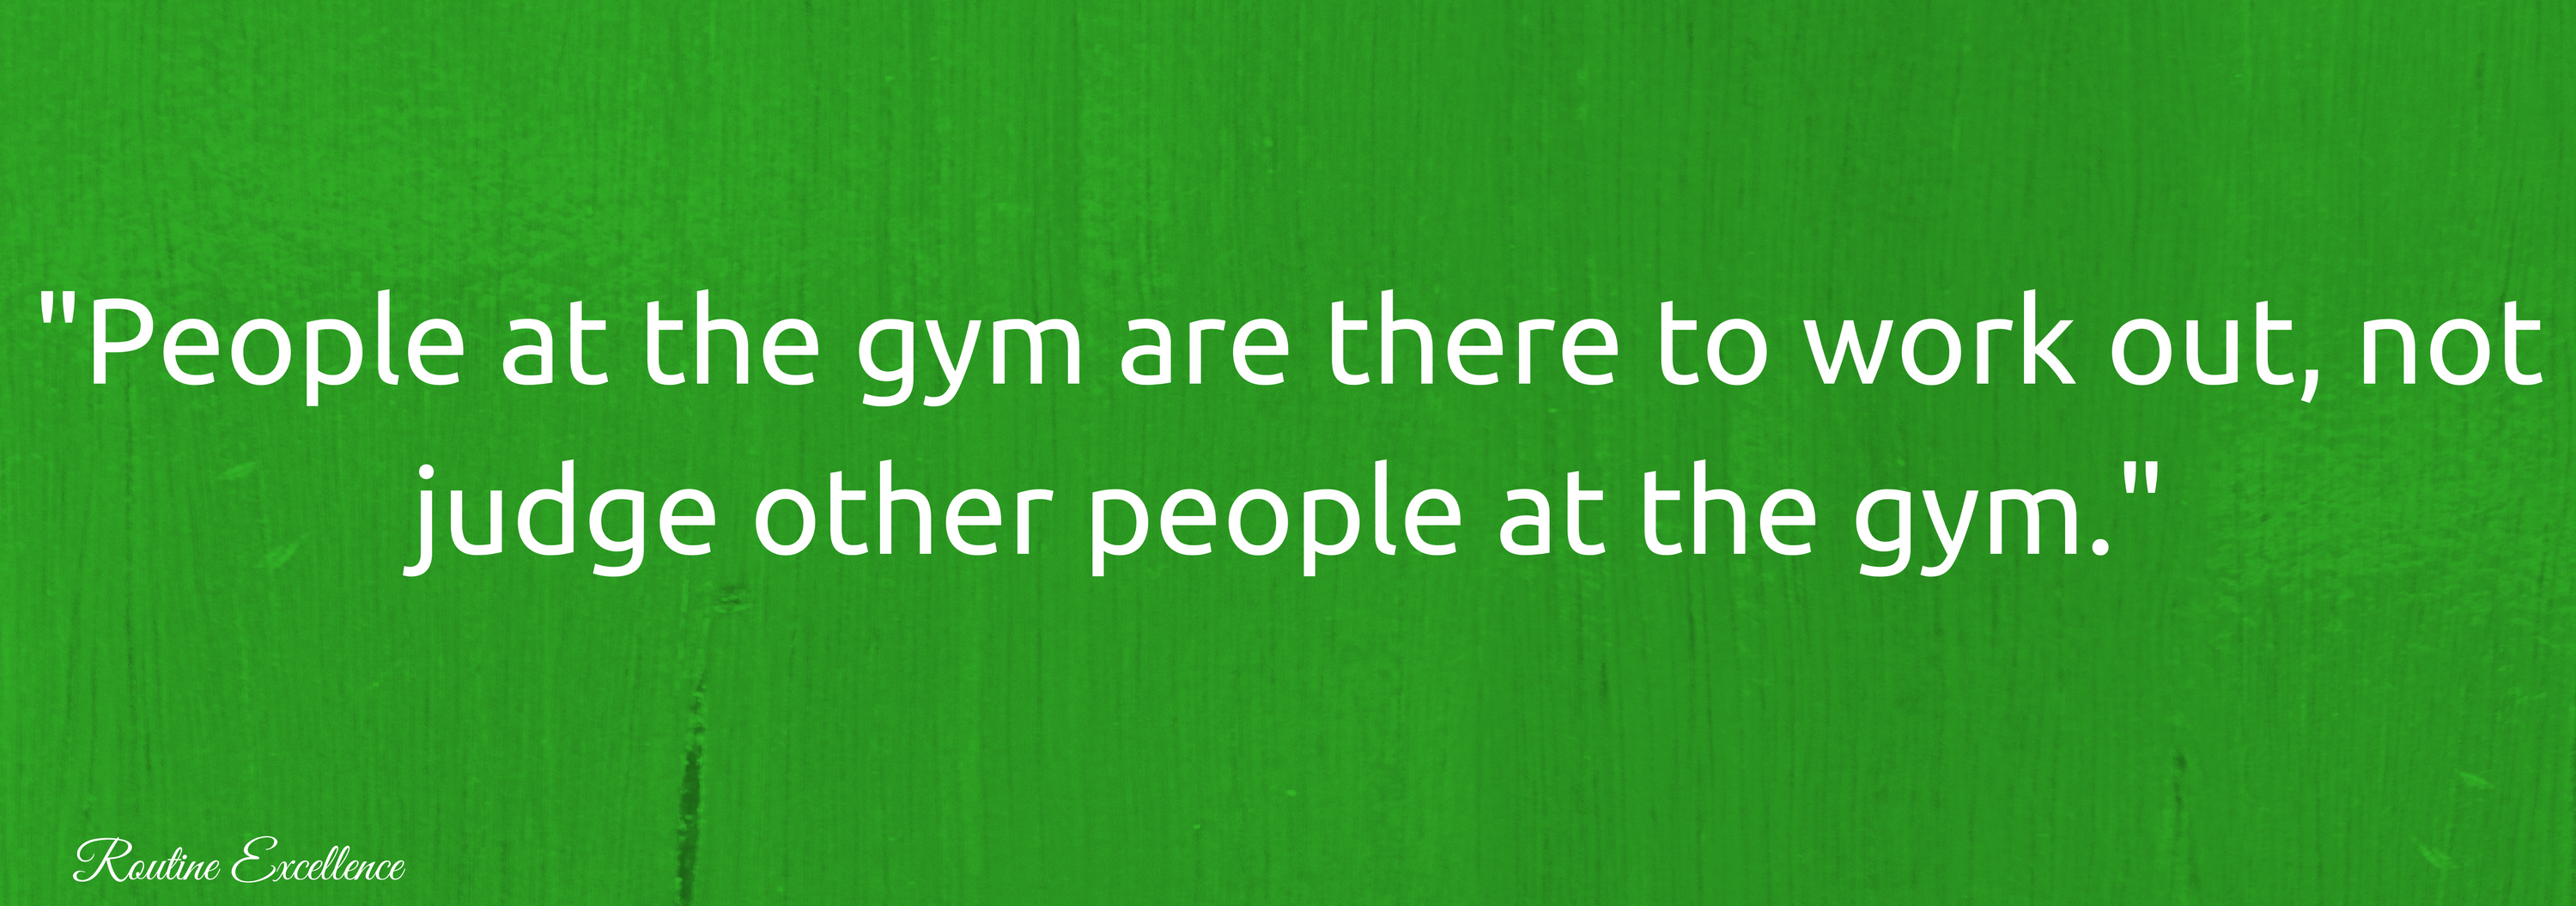 People at the gym aren't judging